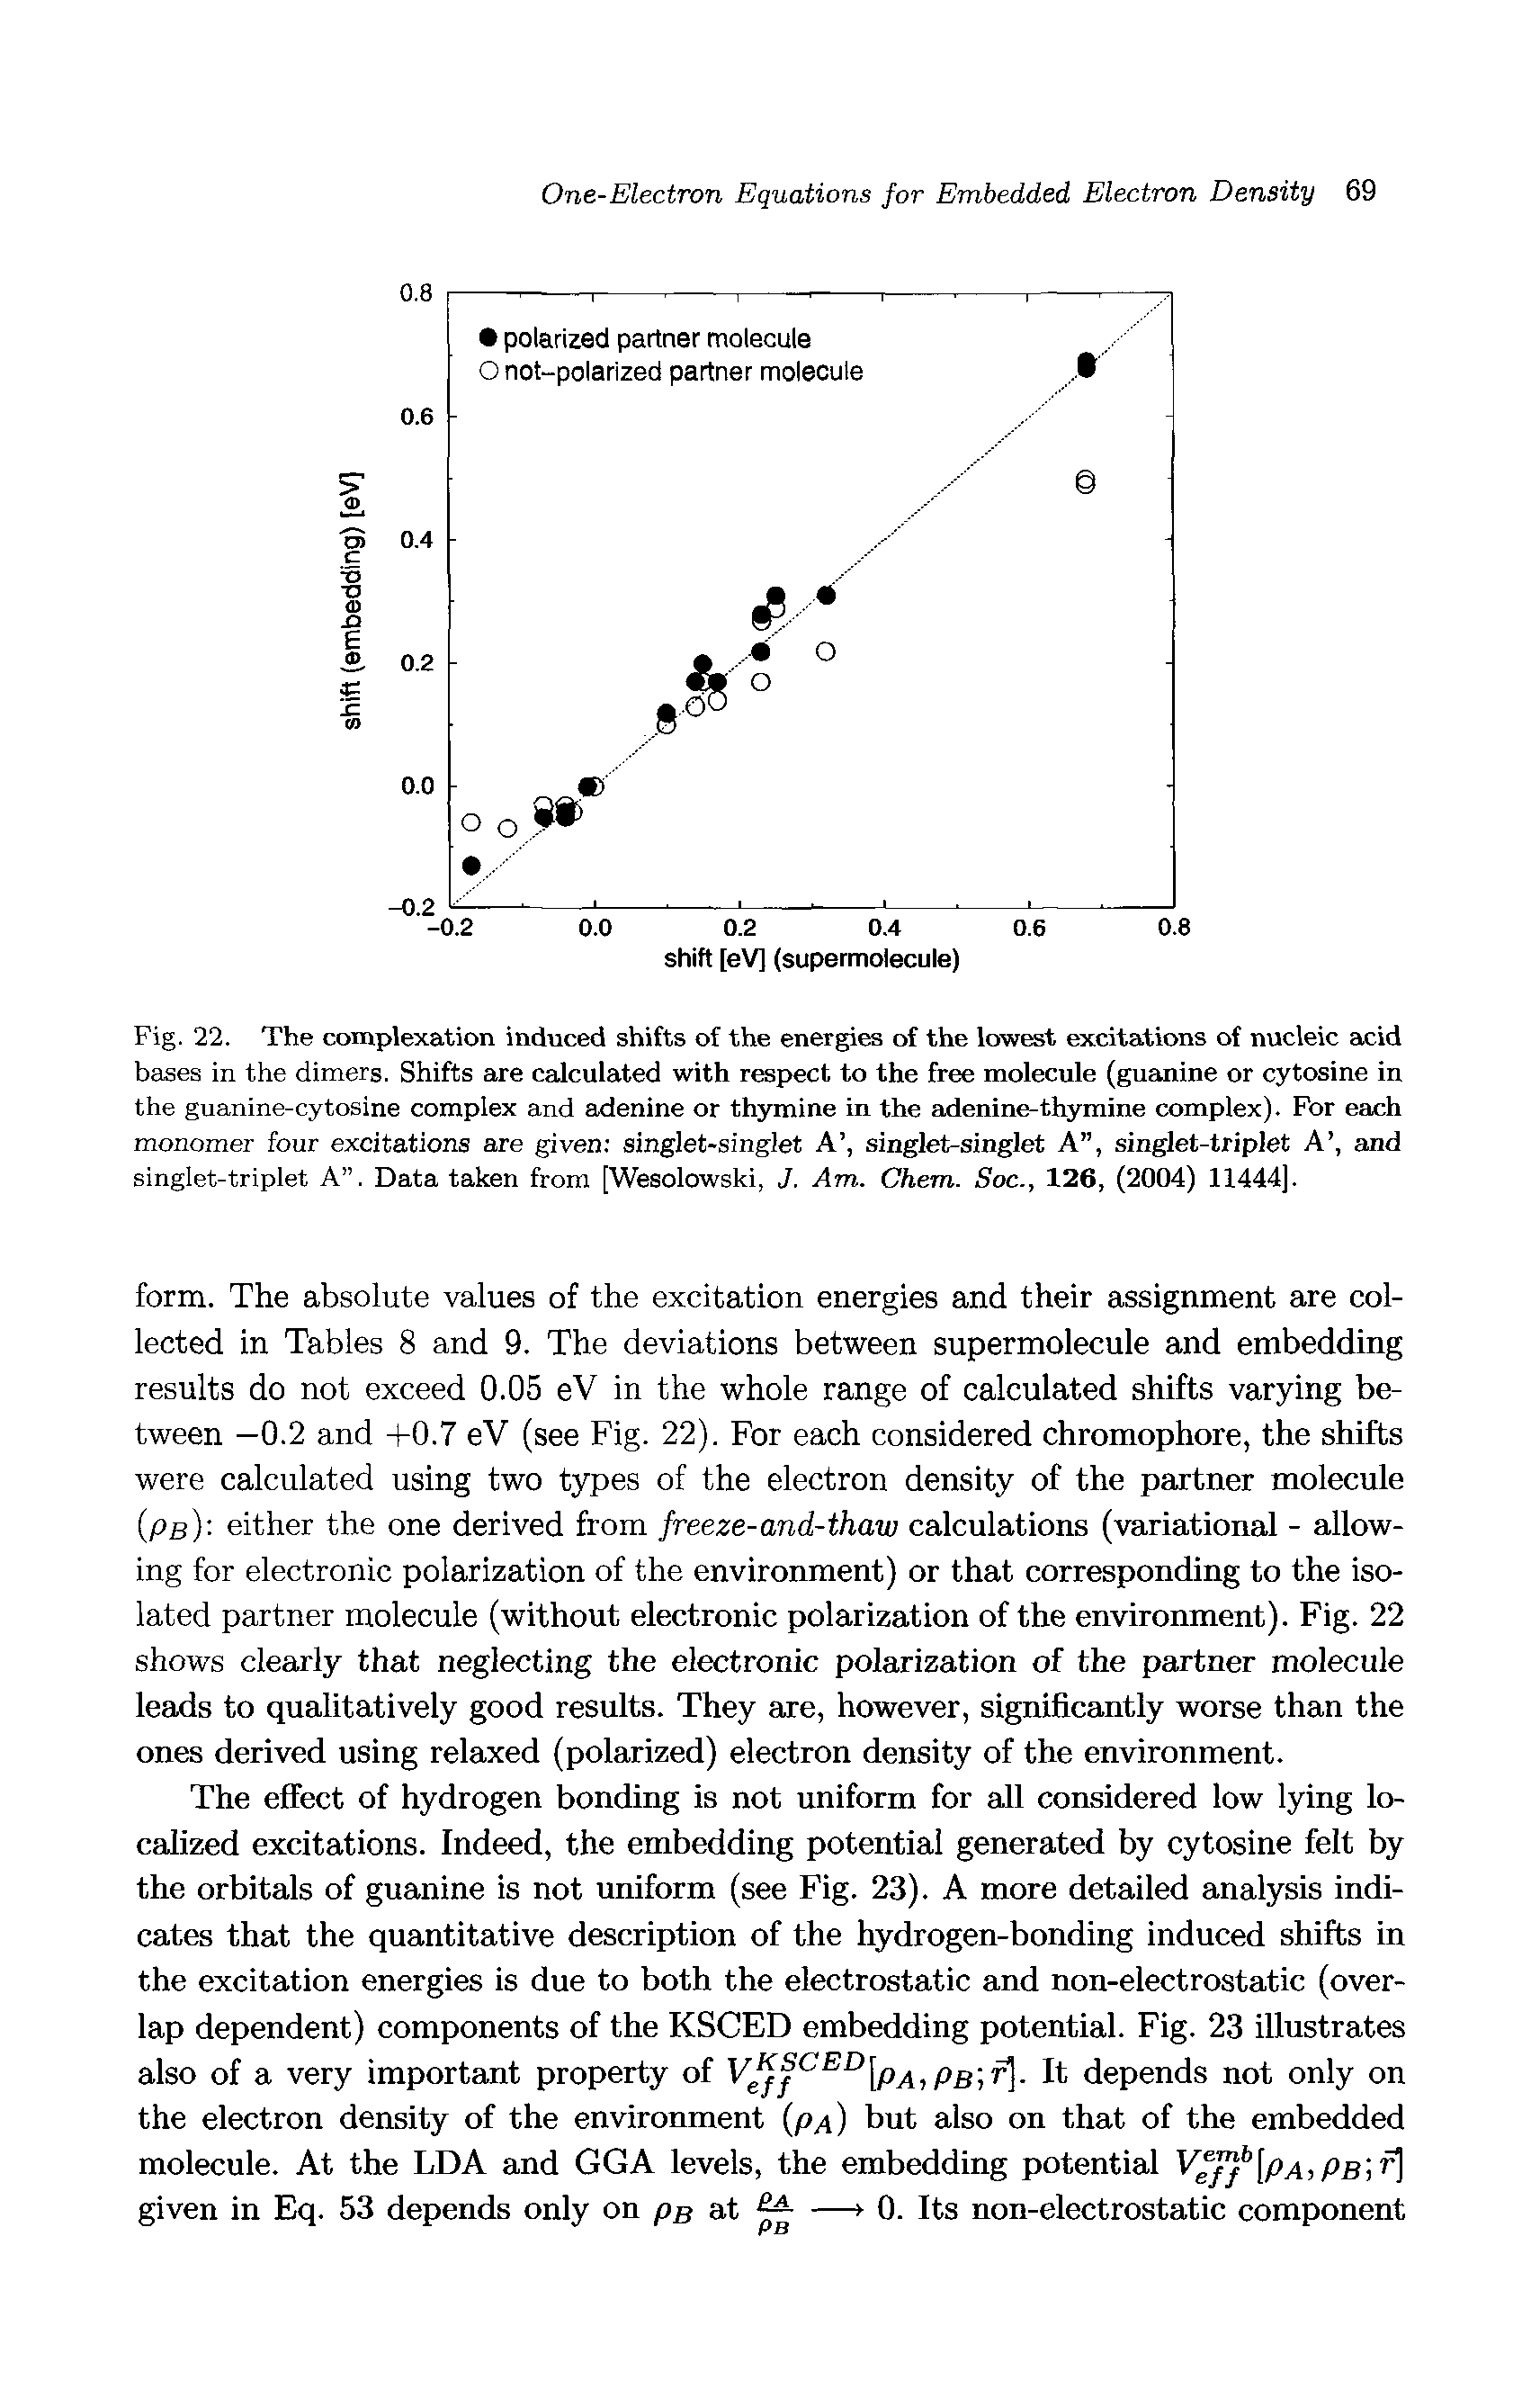 Fig. 22. The complexation induced shifts of the energies of the lowest excitations of nucleic acid bases in the dimers. Shifts are calculated with respect to the free molecule (guanine or cytosine in the guanine-cytosine complex and adenine or thymine in the adenine-thymine complex). For each monomer four excitations are given singlet-singlet A , singlet-singlet A , singlet-triplet A , and singlet-triplet A . Data taken from [Wesolowski, J. Am. Chem. Soc., 126, (2004) 11444].